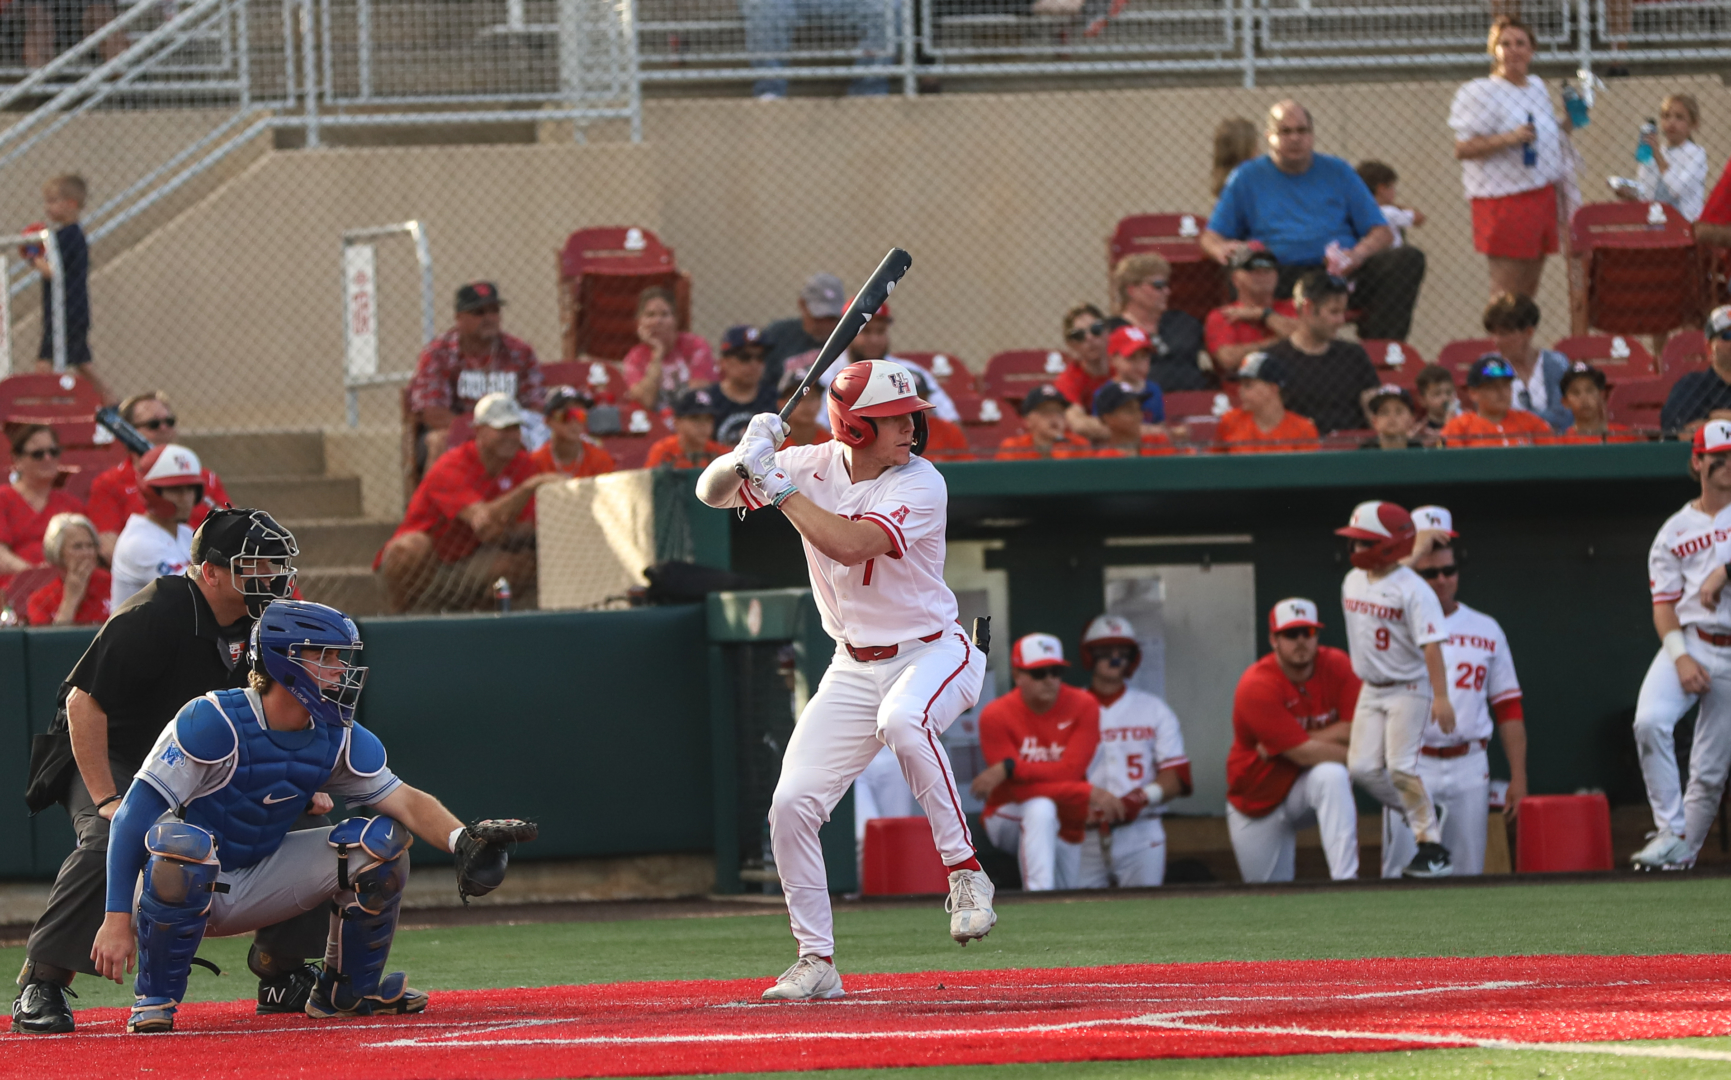 UH baseball third baseman Zach Arnold's solo home run in the top of the seventh was the only run in the Cougars loss to Lamar on Tuesday night. | Sean Thomas/The Cougar